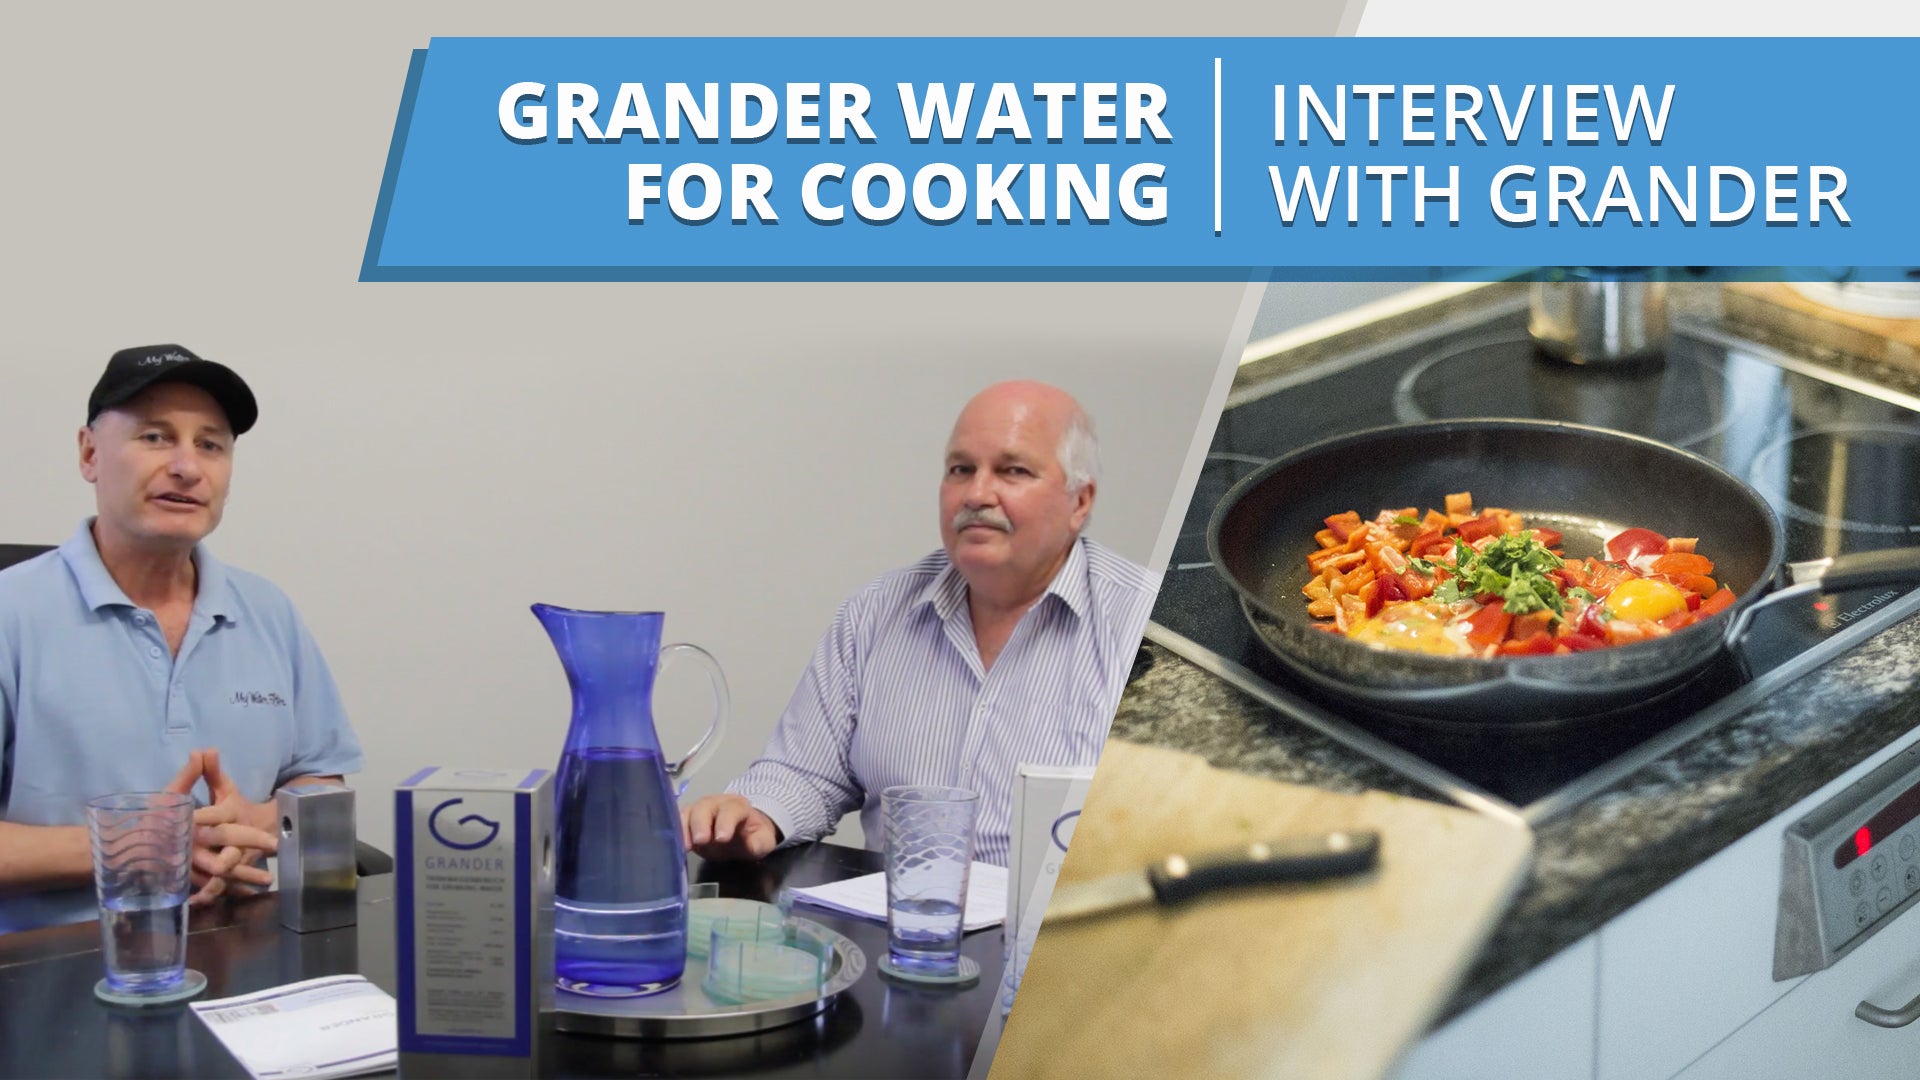 [VIDEO] Grander water for cooking - Interview with Wayne from Grander